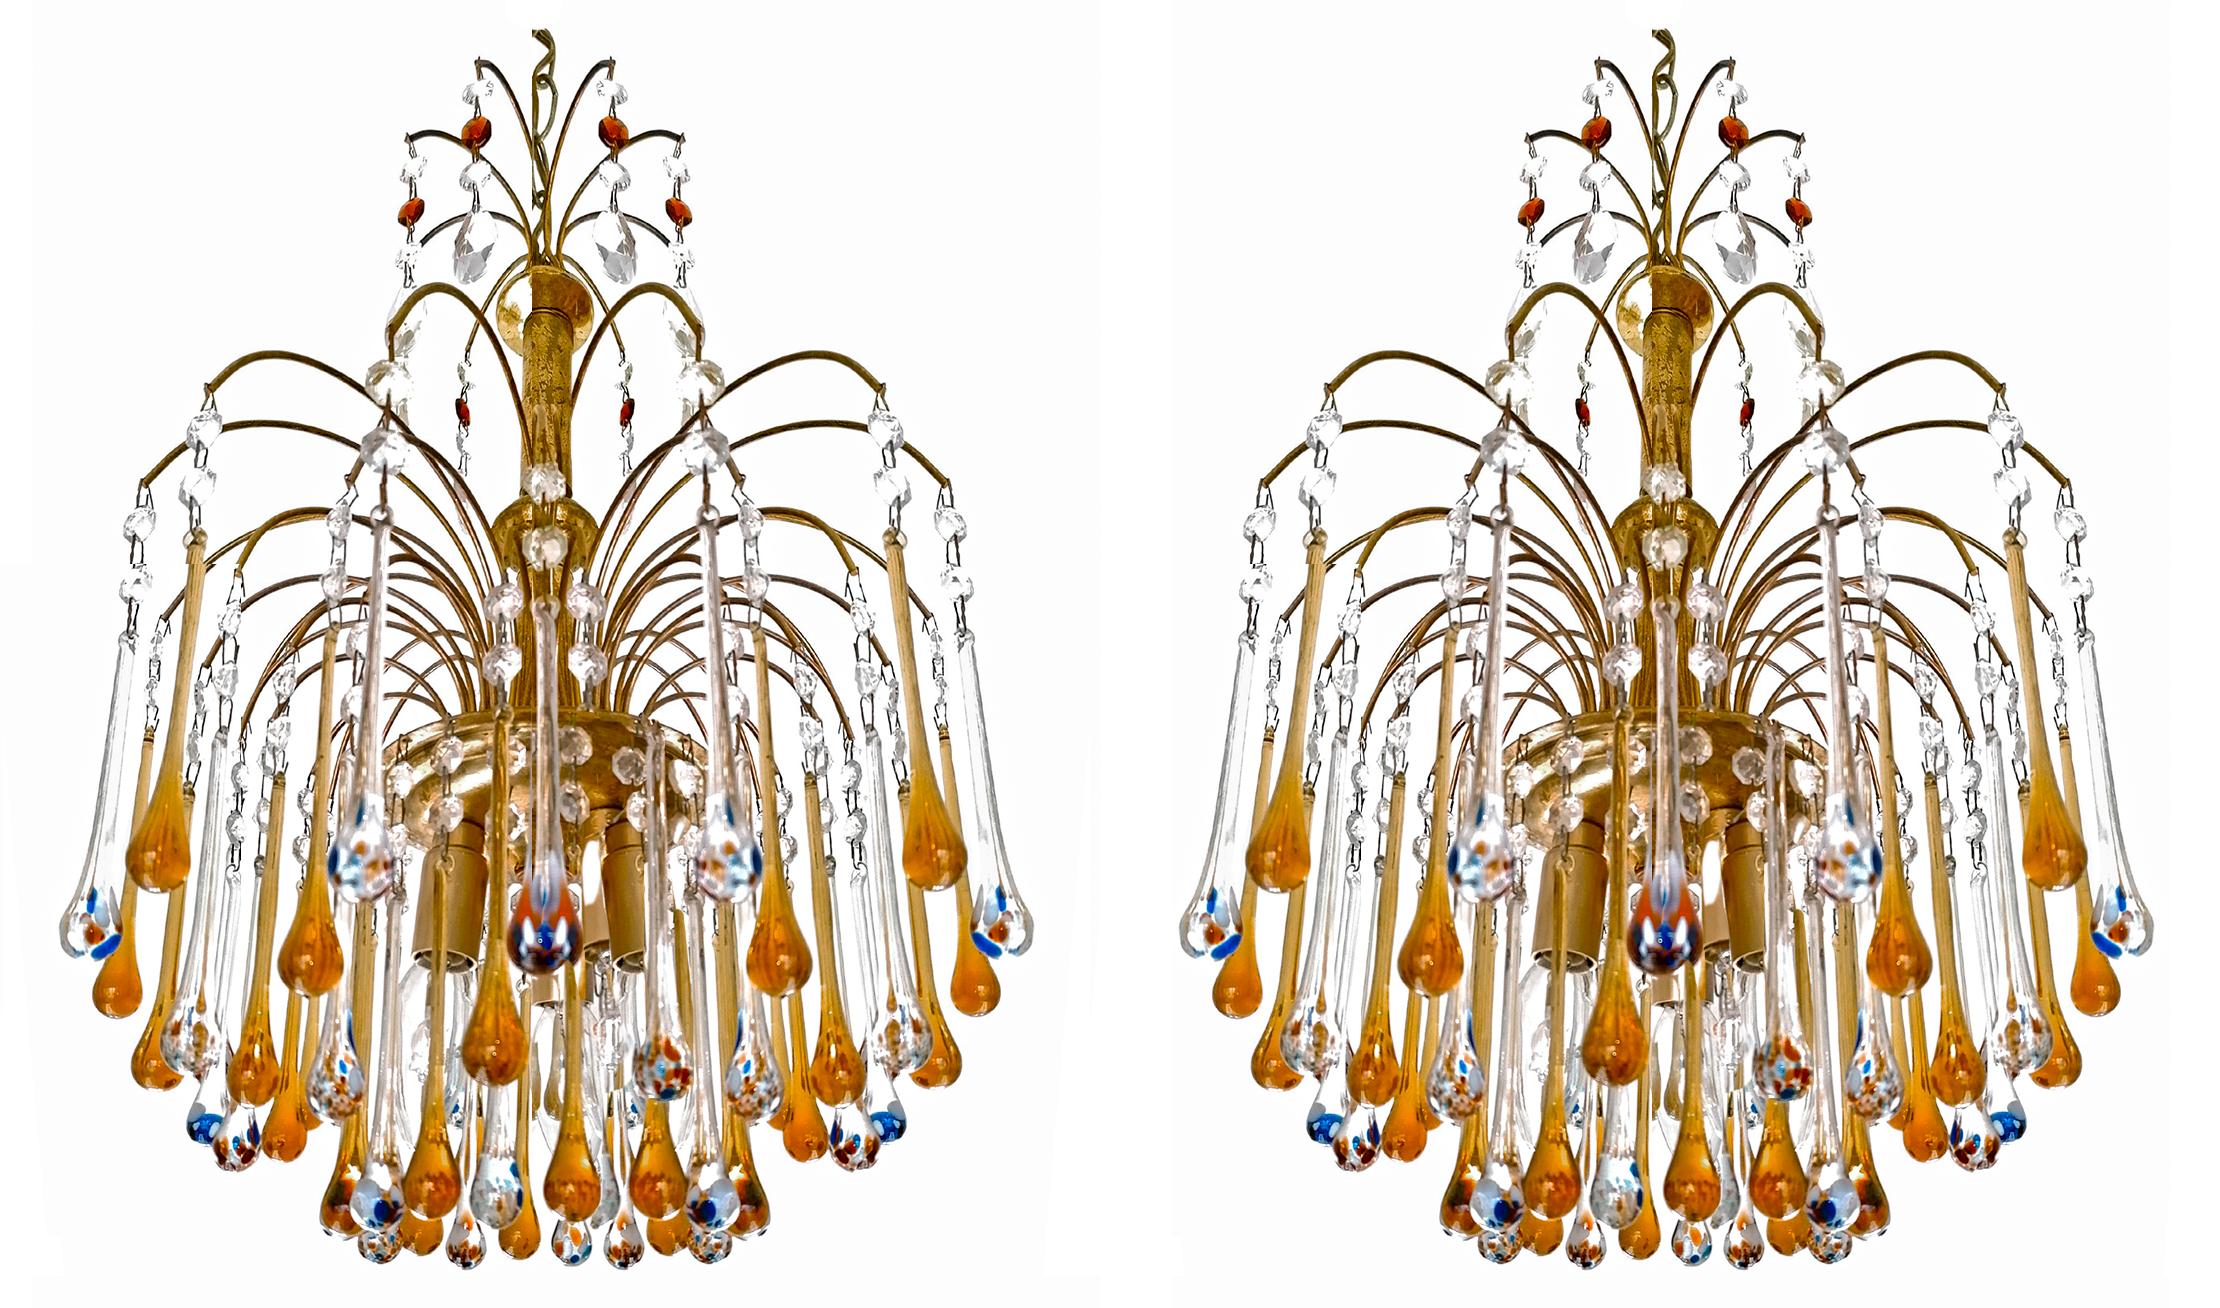 Lovely pair of Italian waterfall Chandeliers in style of Venini. In gilt brass and Amber & Polychrome Murano hand blown Crystal Teardrop glasses making a gorgeous sparking lighting effect!
Age patina.

Dimensions:
Height: 35.44 in.(chain = 10